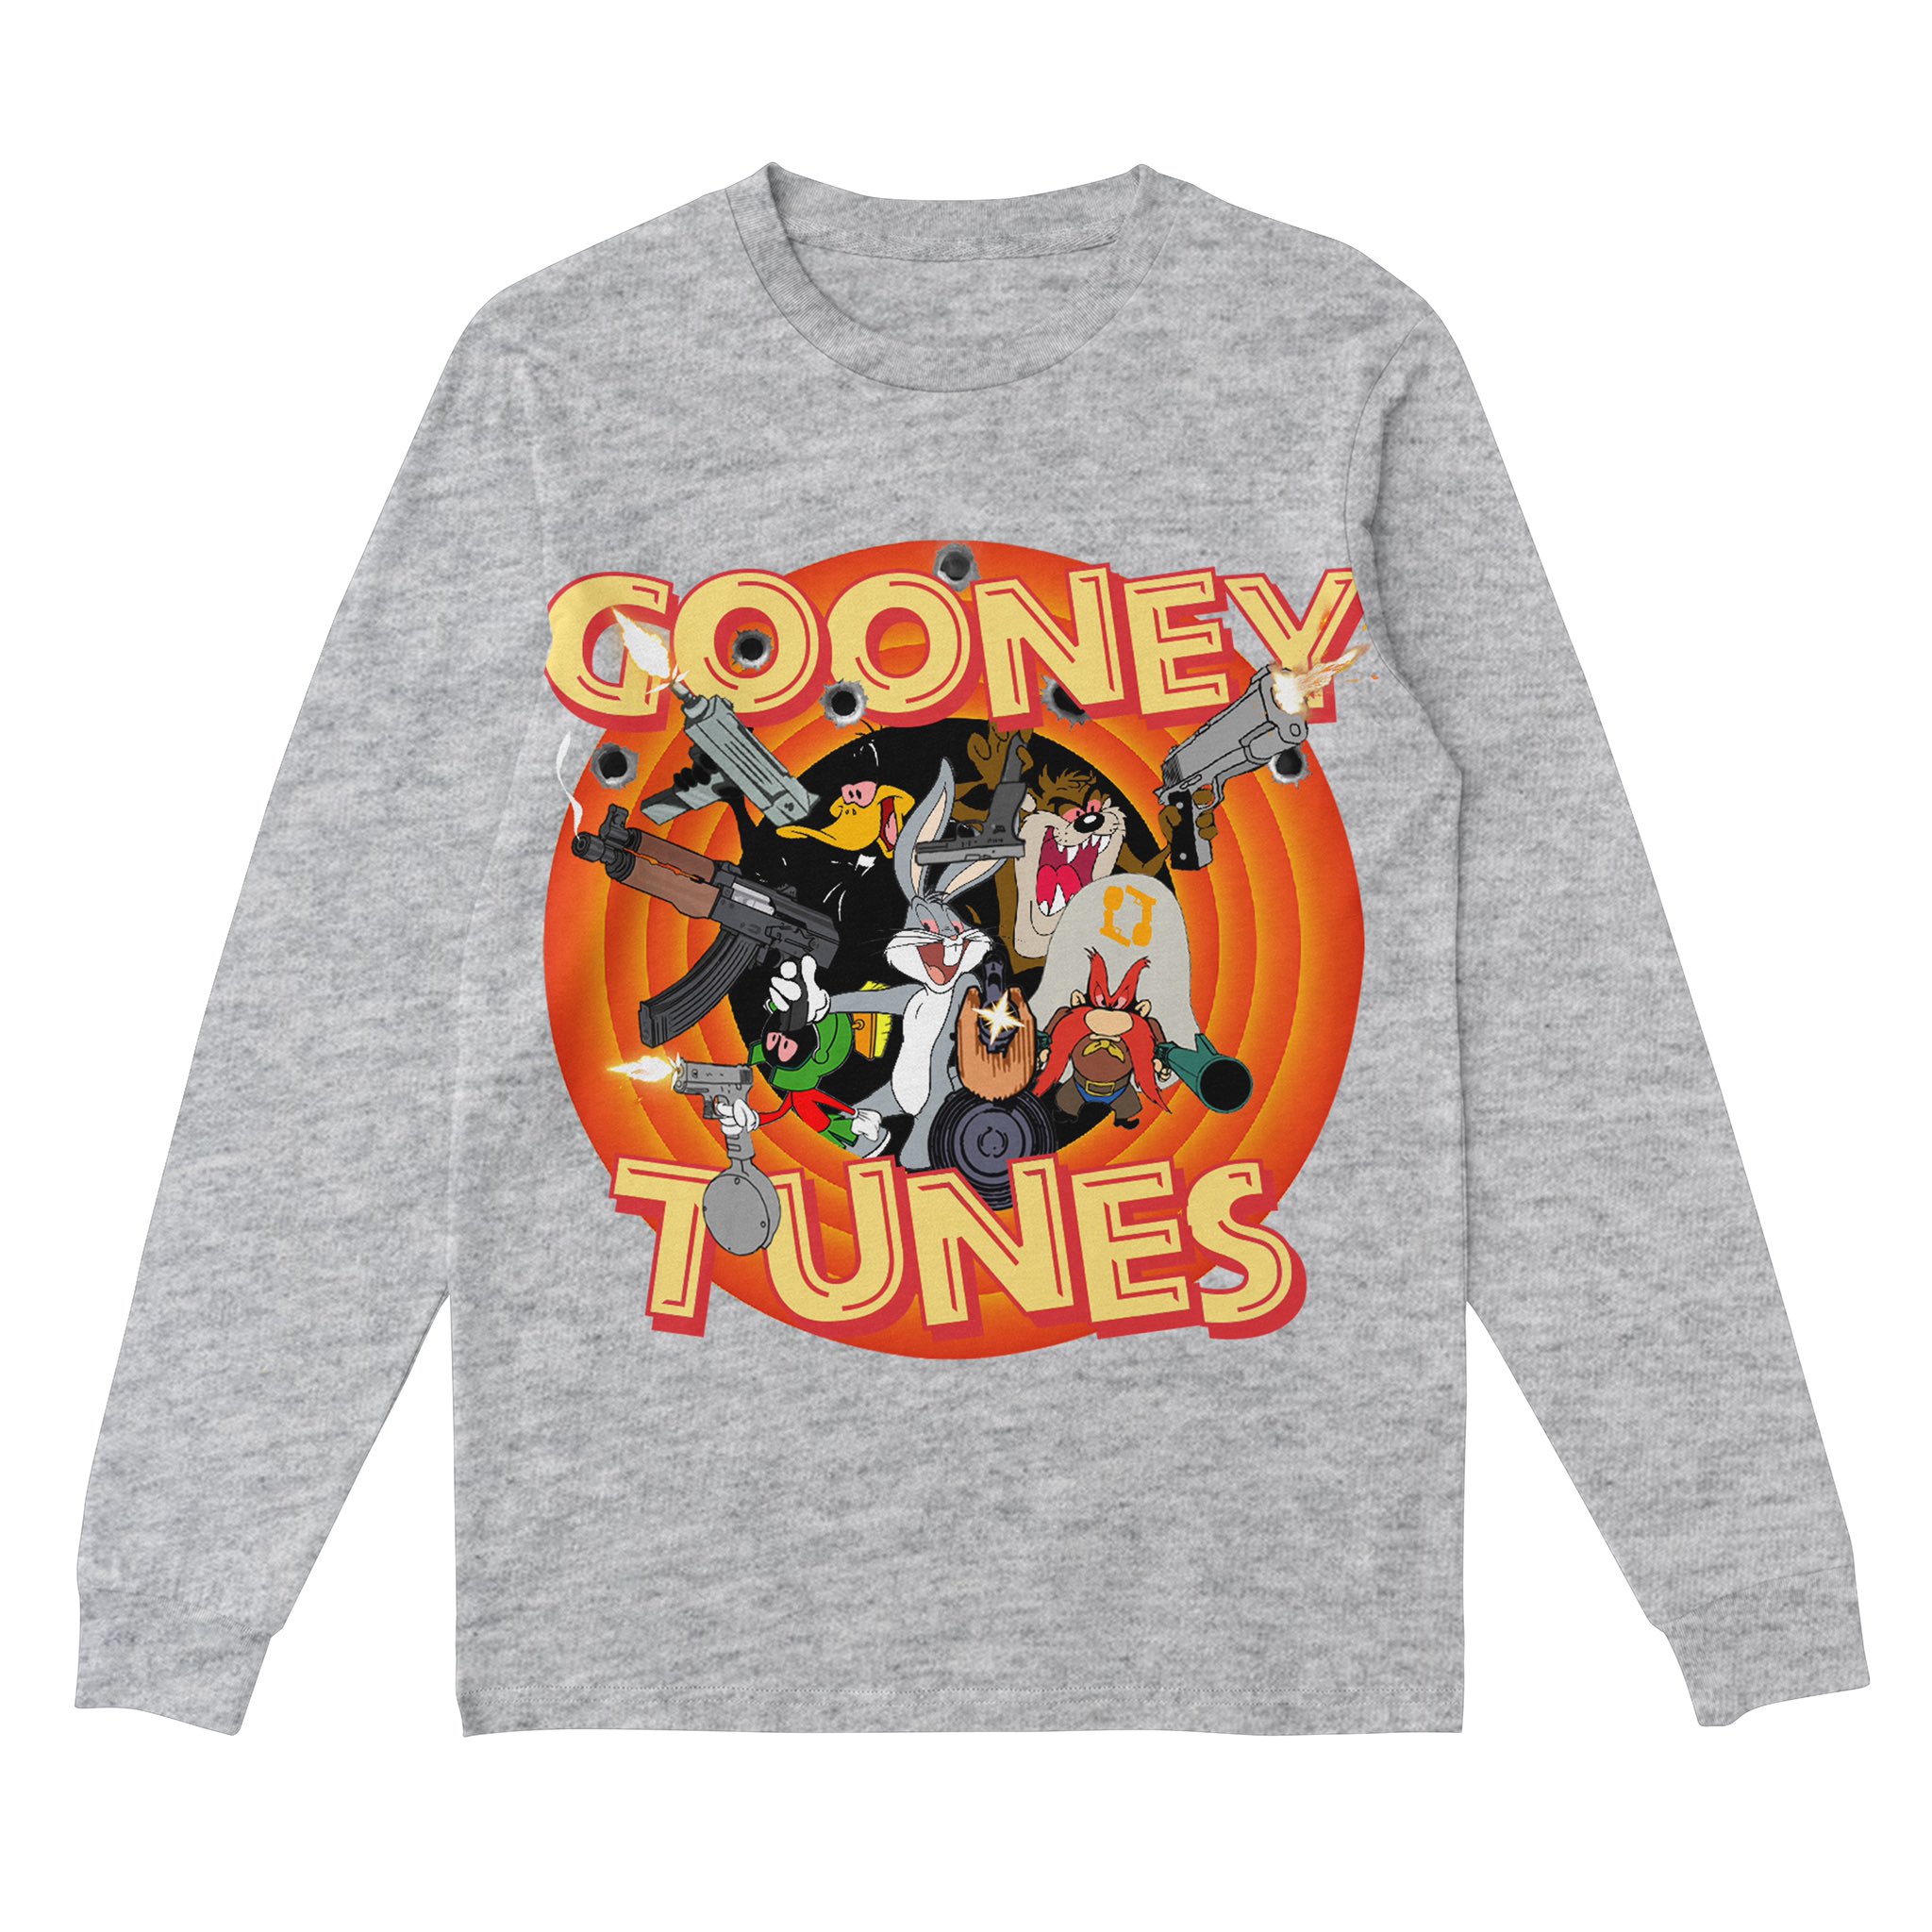 fuckthe2000s on Twitter: "“GOONEY TUNES” OUT NOW ! In #Flavors 🖤🤍💛❤️ @ fuckthe2000s https:⁄⁄t.co⁄qi7ZvvlImk https:⁄⁄t.co⁄QAEvhMhF1V" ⁄ Twitter